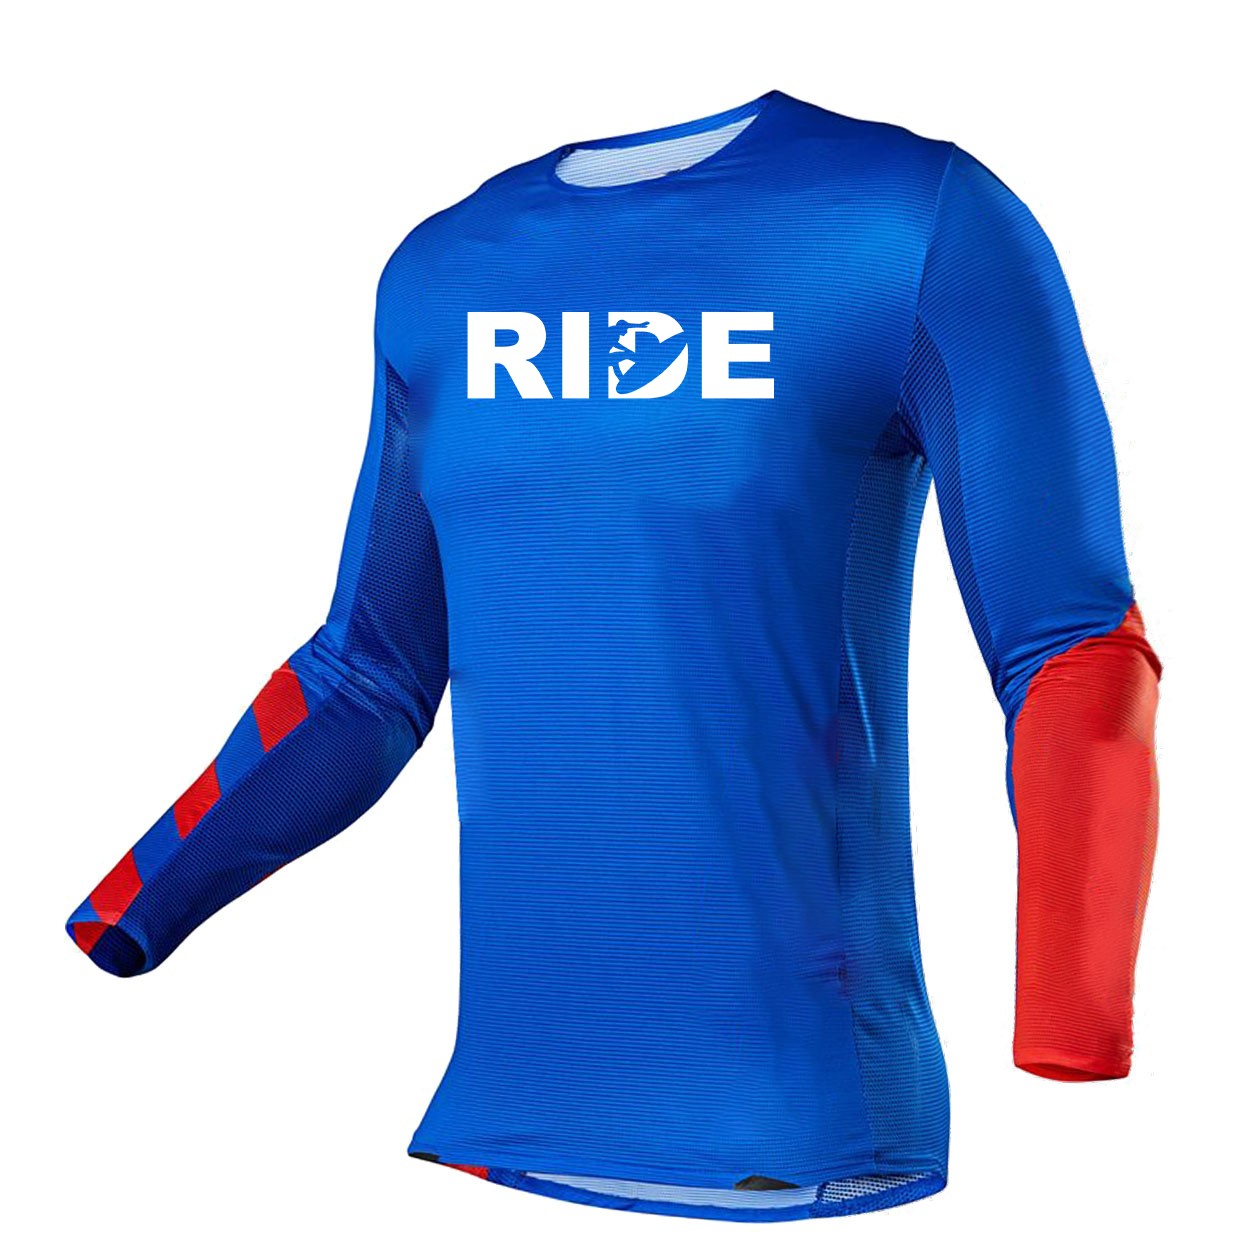 Ride Surf Logo Classic Performance Jersey Long Sleeve Shirt Blue/Red